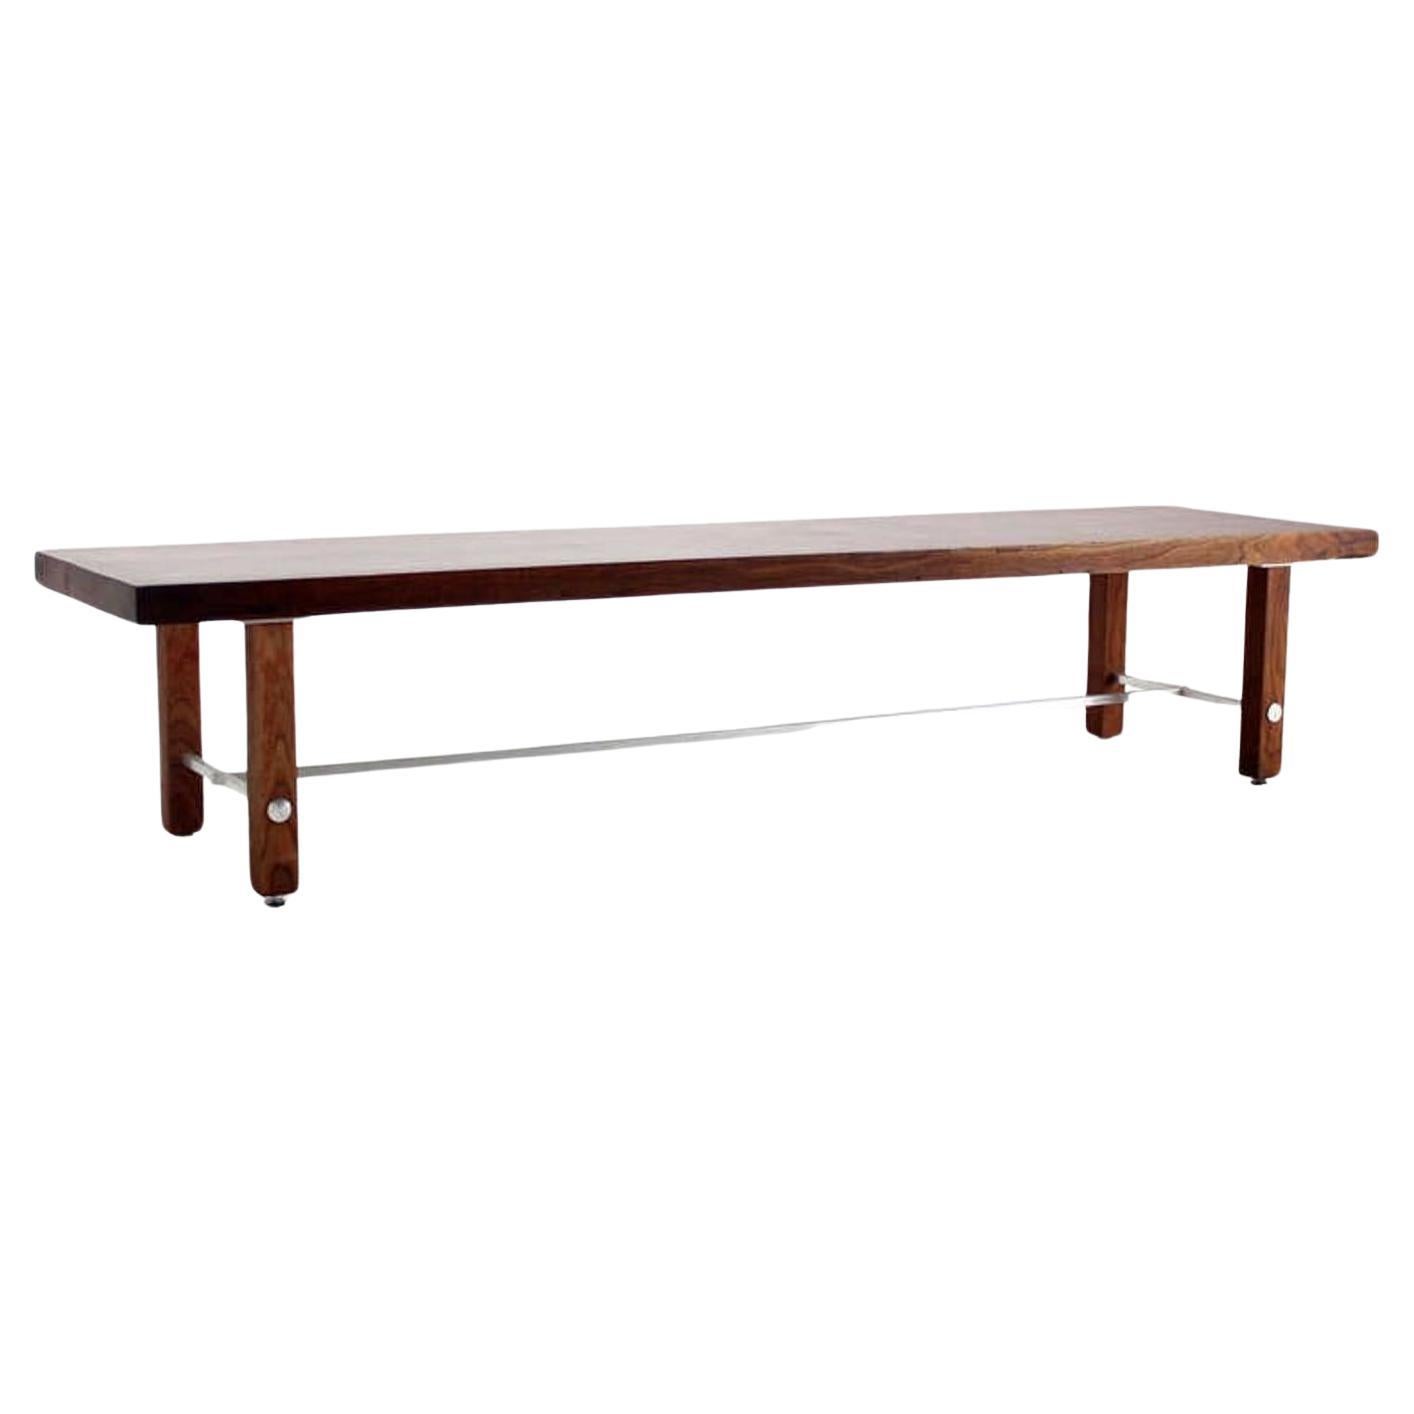 6 ' Long Solid Walnut Top Coffee Table or Bench on Solid Legs Aluminum Stretcher